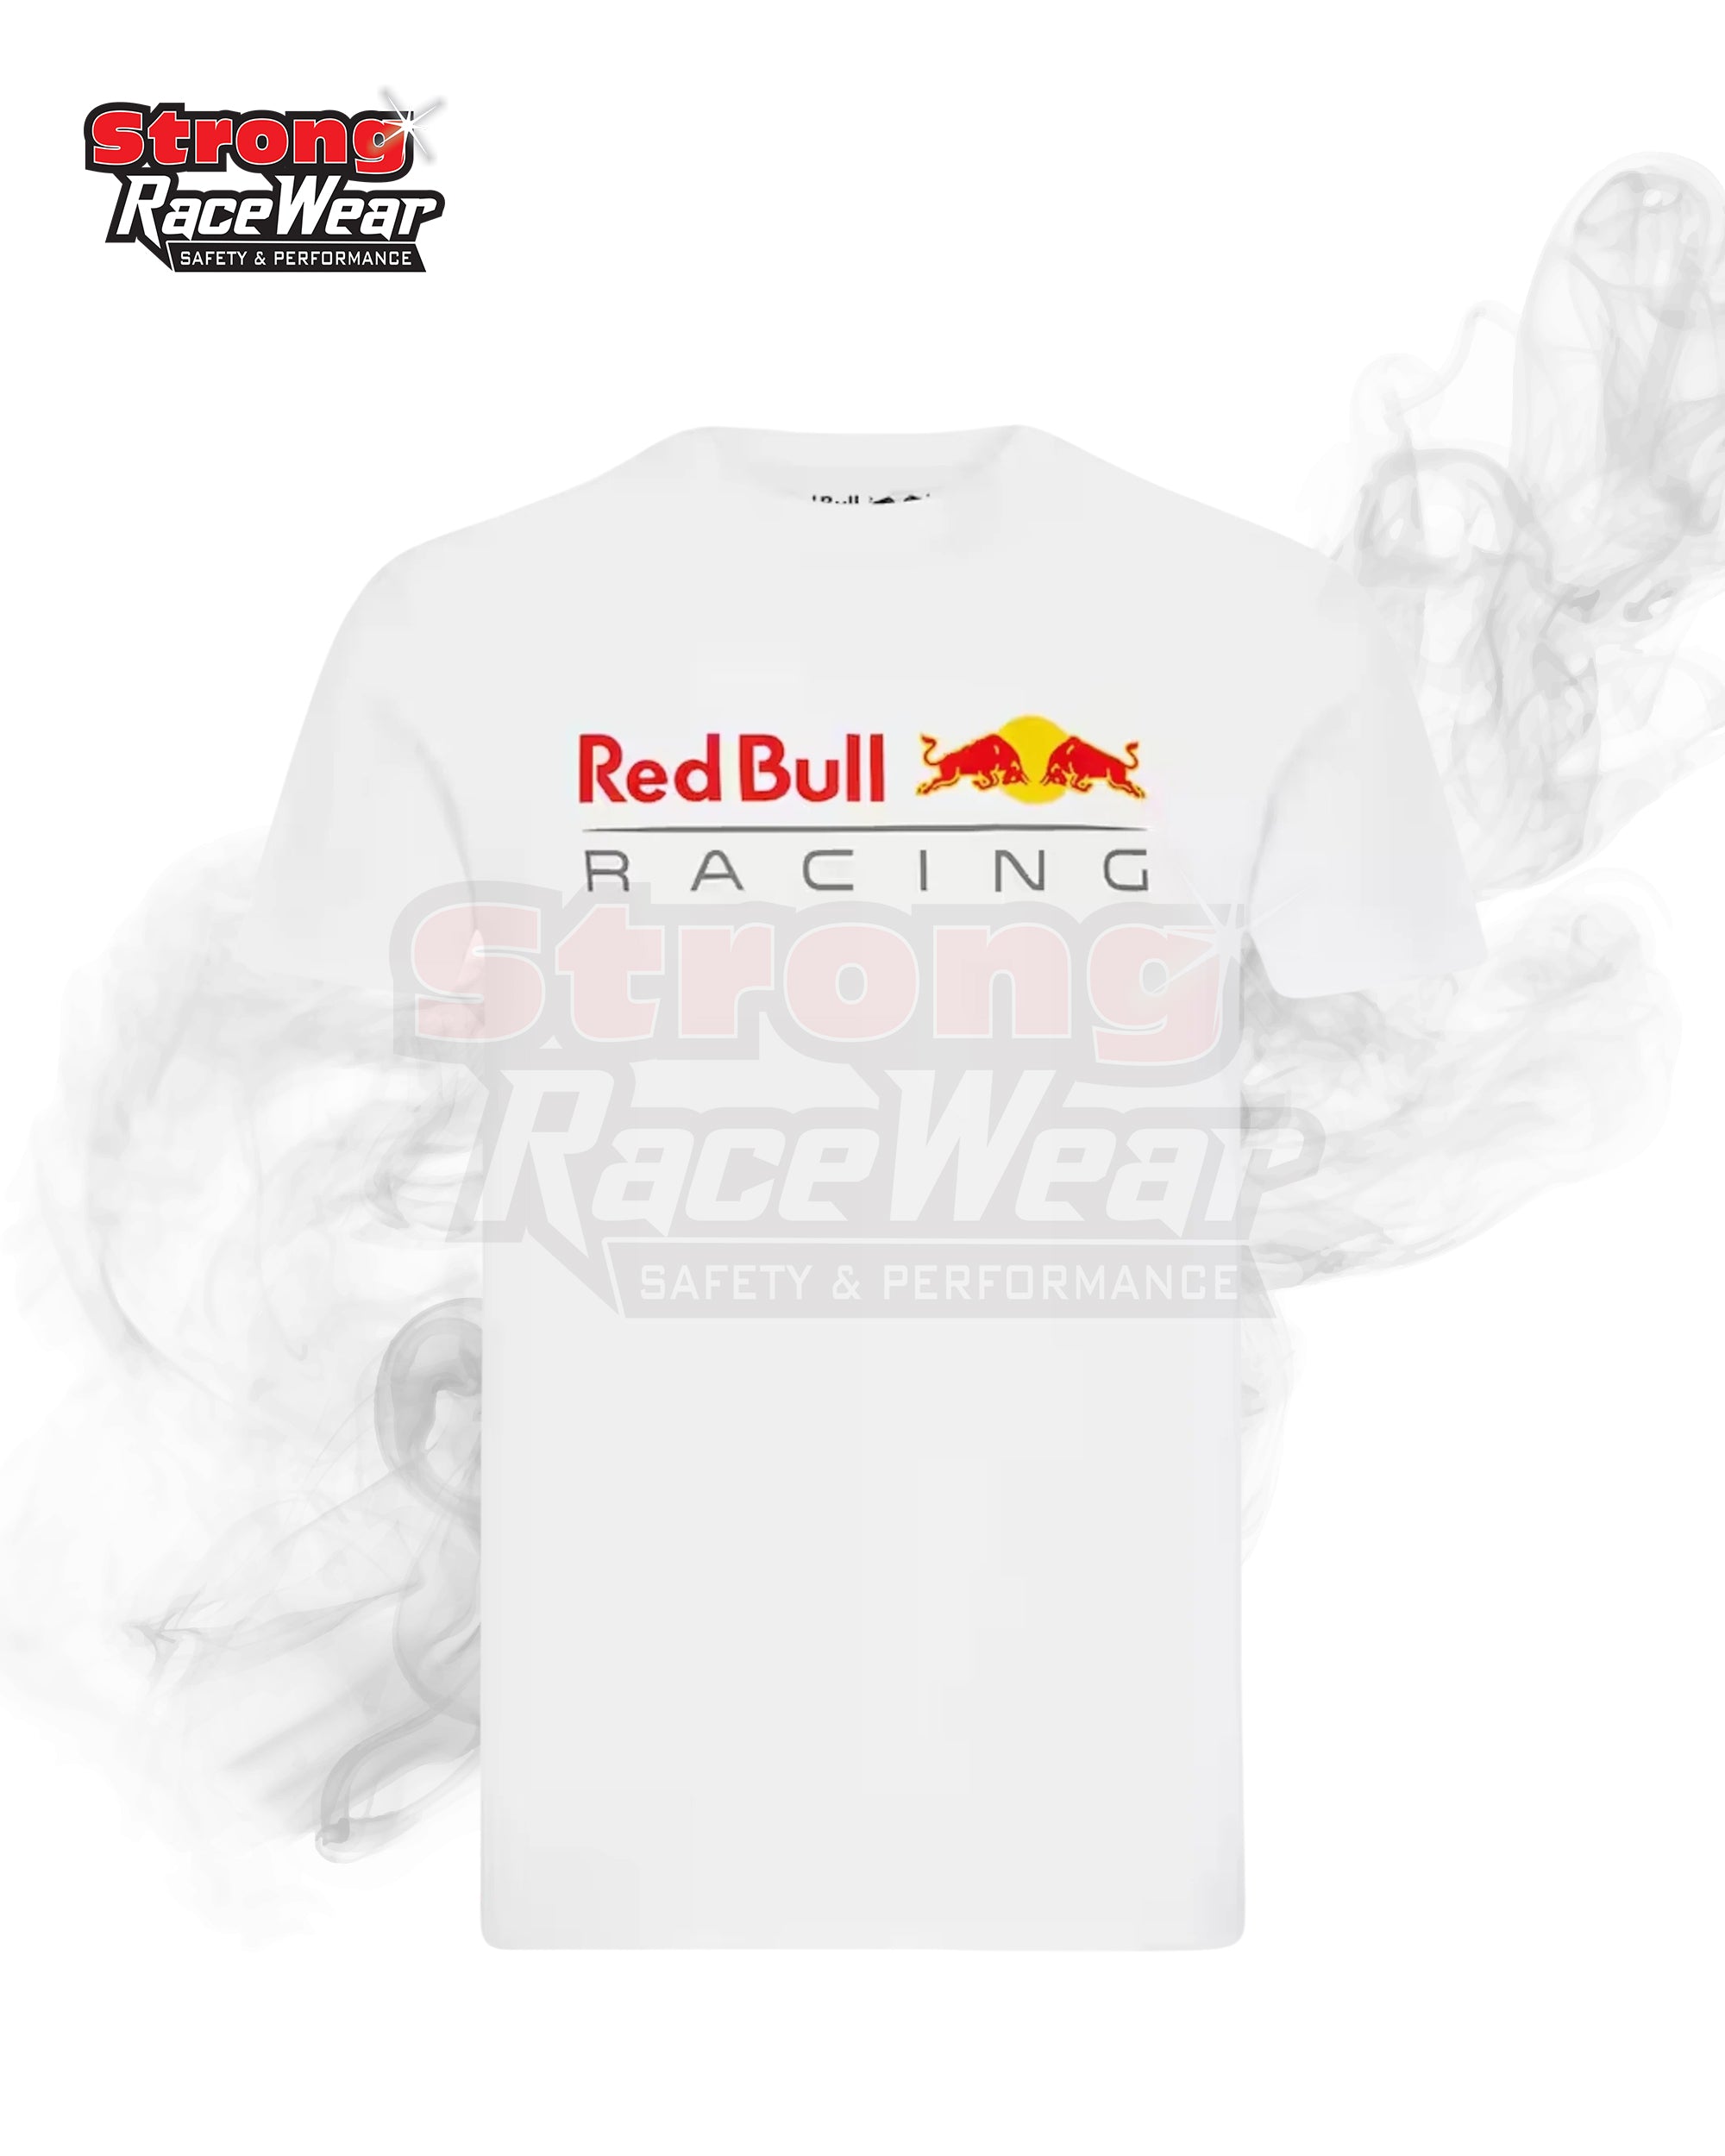 Oracle Red Bull Racing T-Shirt